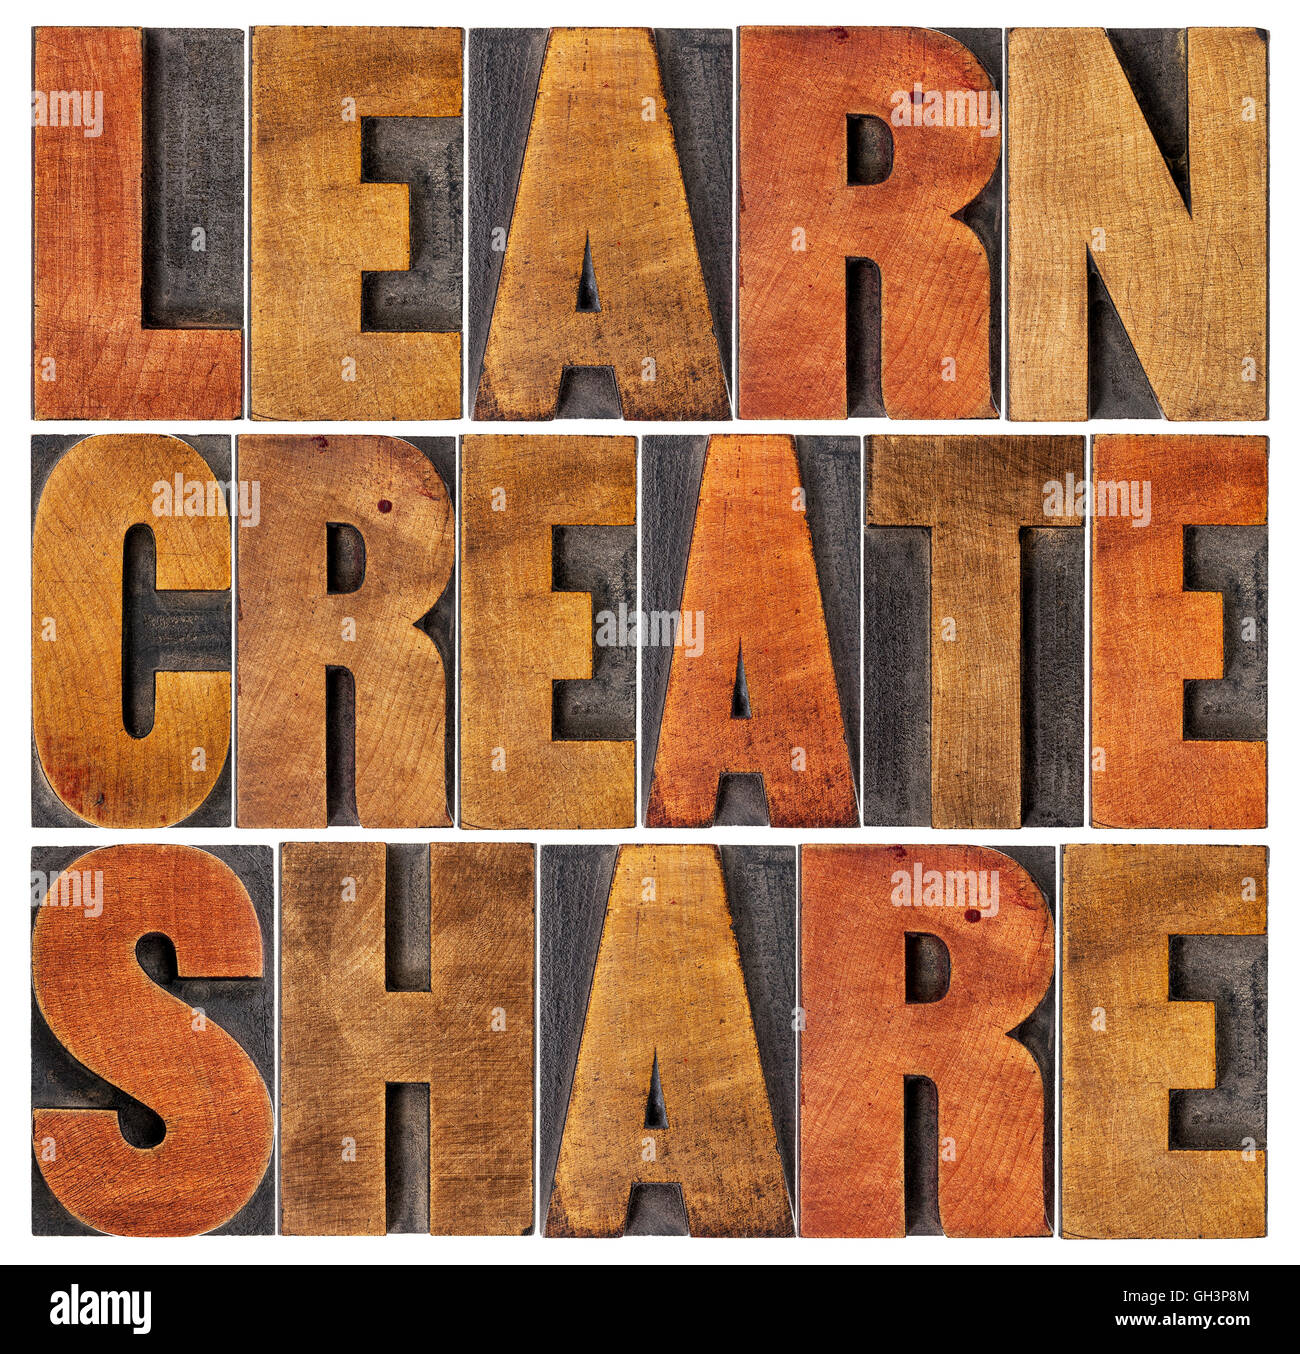 learn, create and share motivational word abstract in vintage letterpress wood type blocks Stock Photo